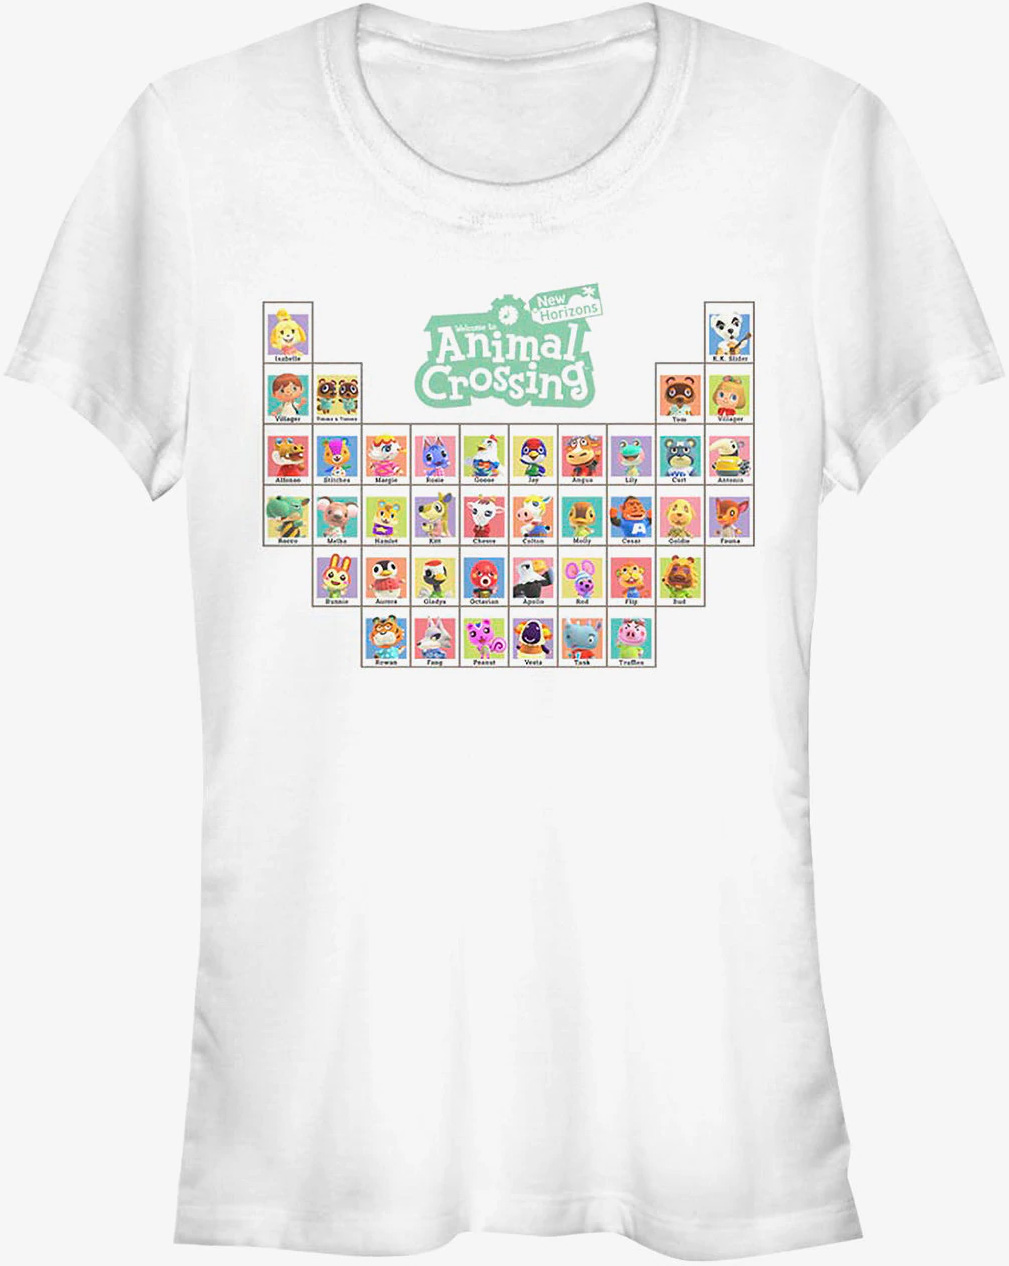 Brand New Animal Crossing New Horizons T Shirts Hoodies And More Available At Hot Topic 20 Off Animal Crossing World